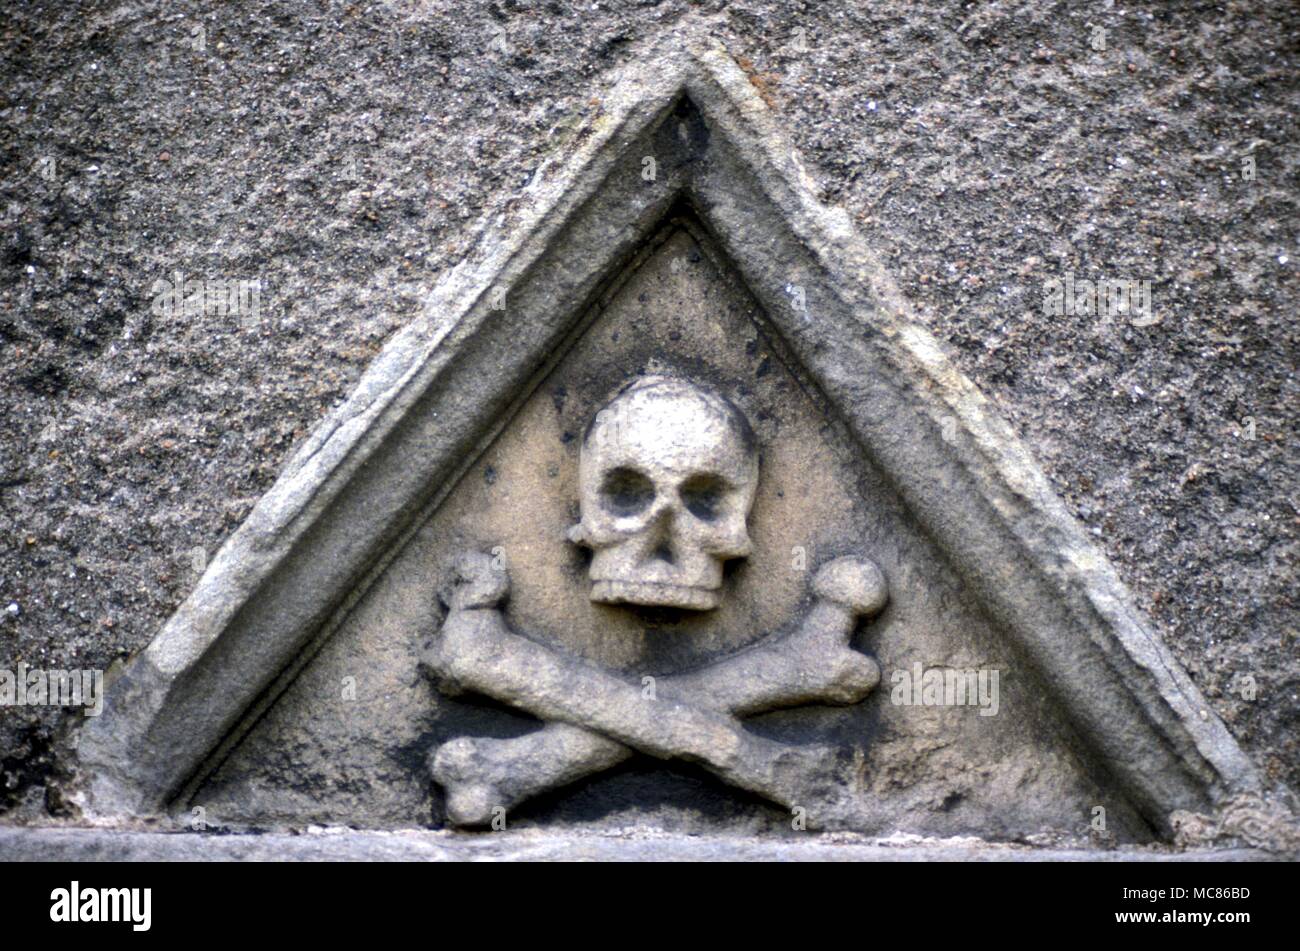 witchcraft sites Grave symbol with skull and crossbones, in the burial grounds of Auldearn Kirk, famous for its witchcraft associations Stock Photo